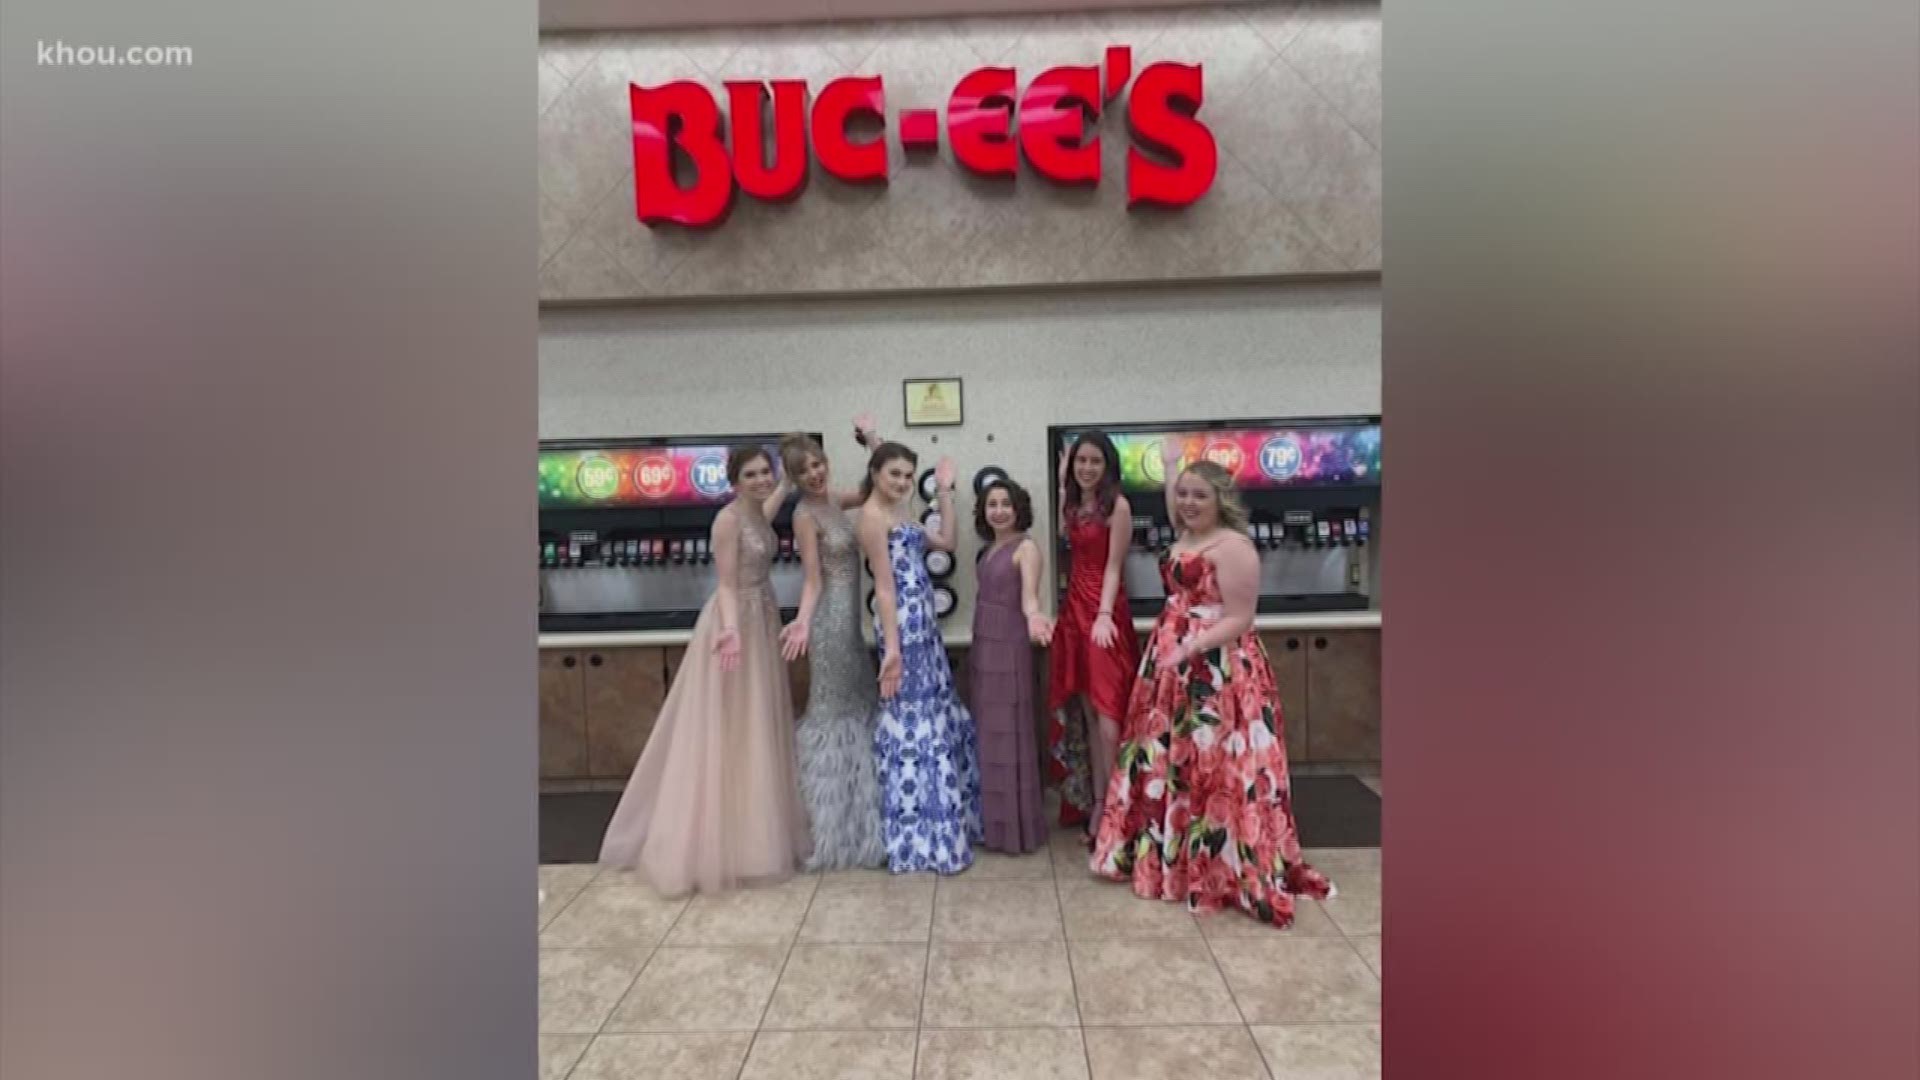 Six friends at Seven Lakes High School in Katy took their pictures at Buc-ee's. According to one of their mom's, the girls wanted to their pics there because "It's a Texas thang."